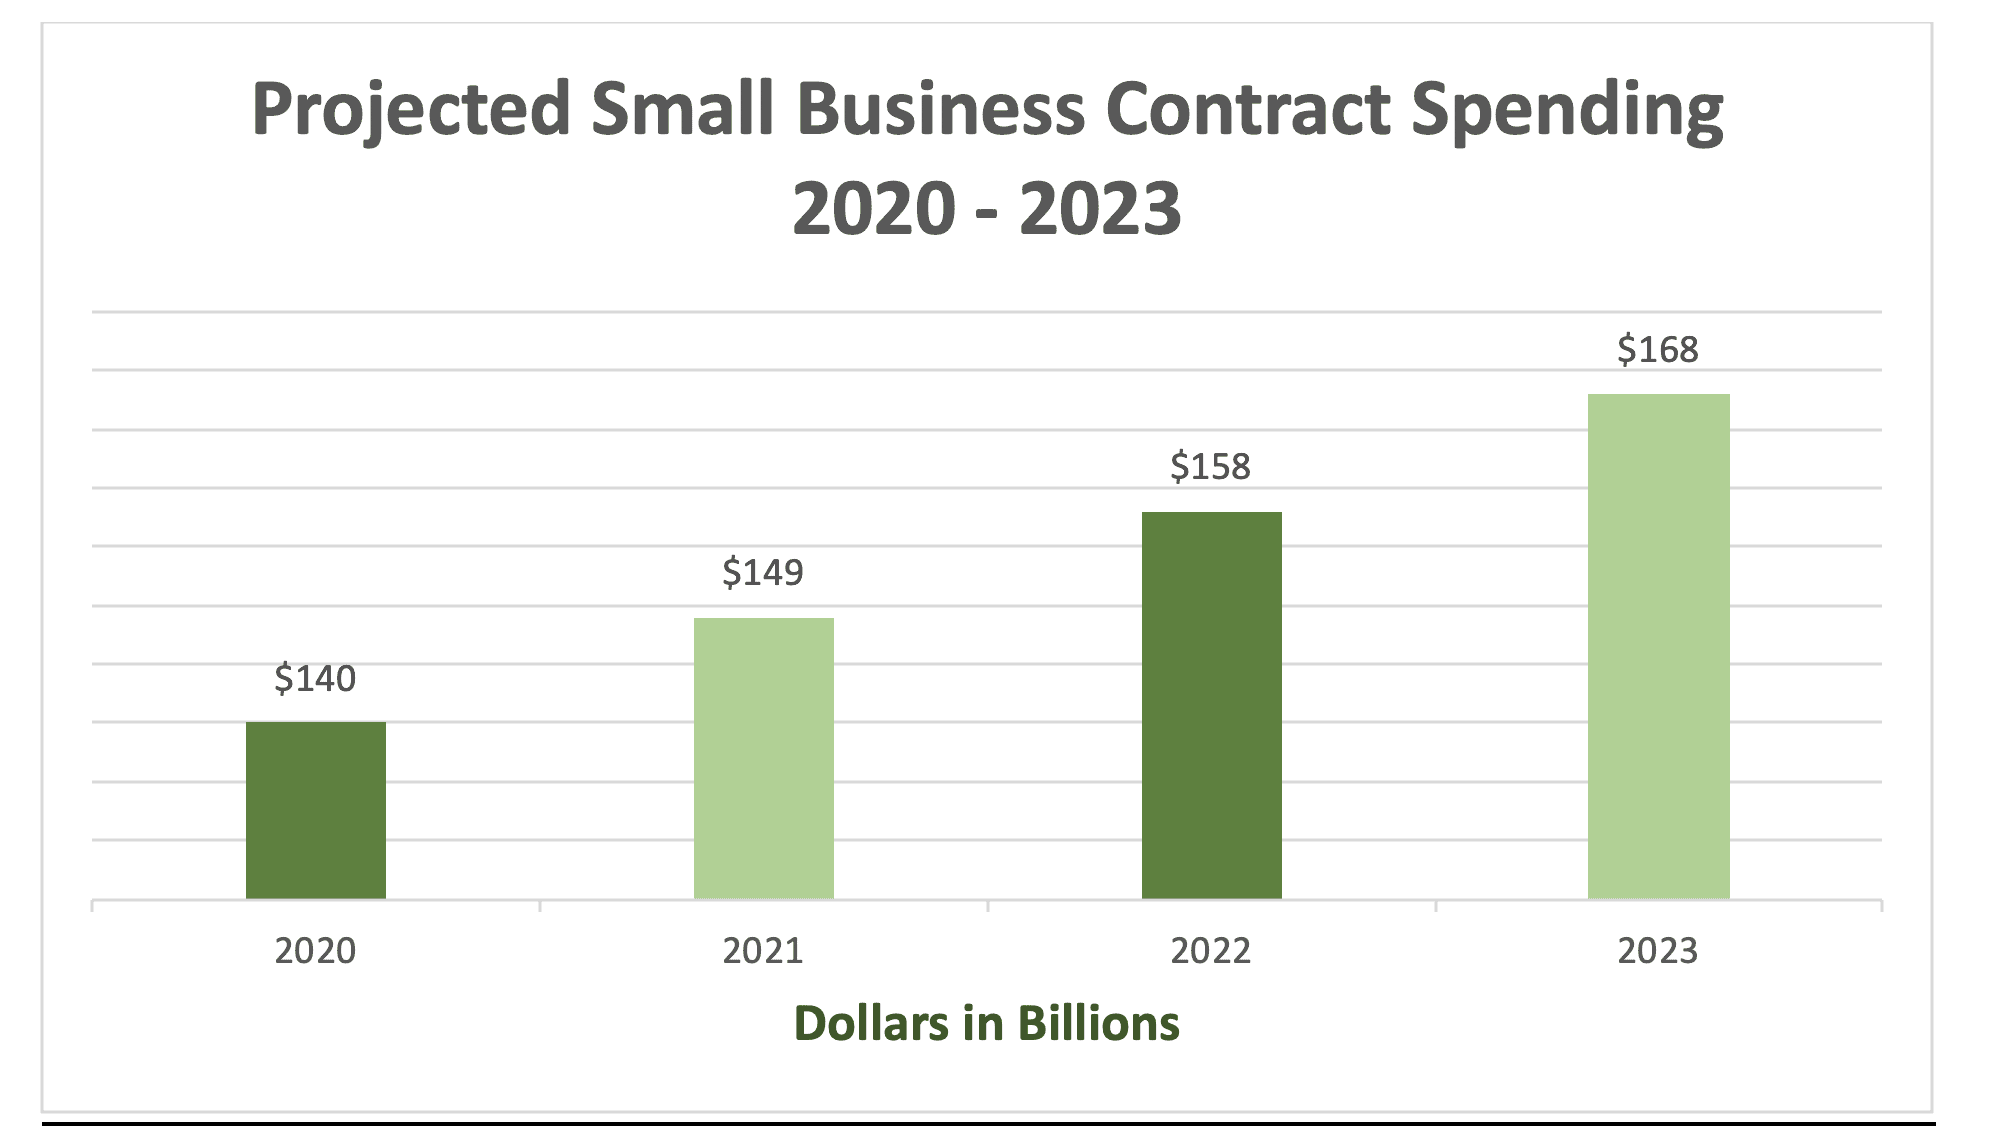 Projected Small Business Contract Spending 2020-2023